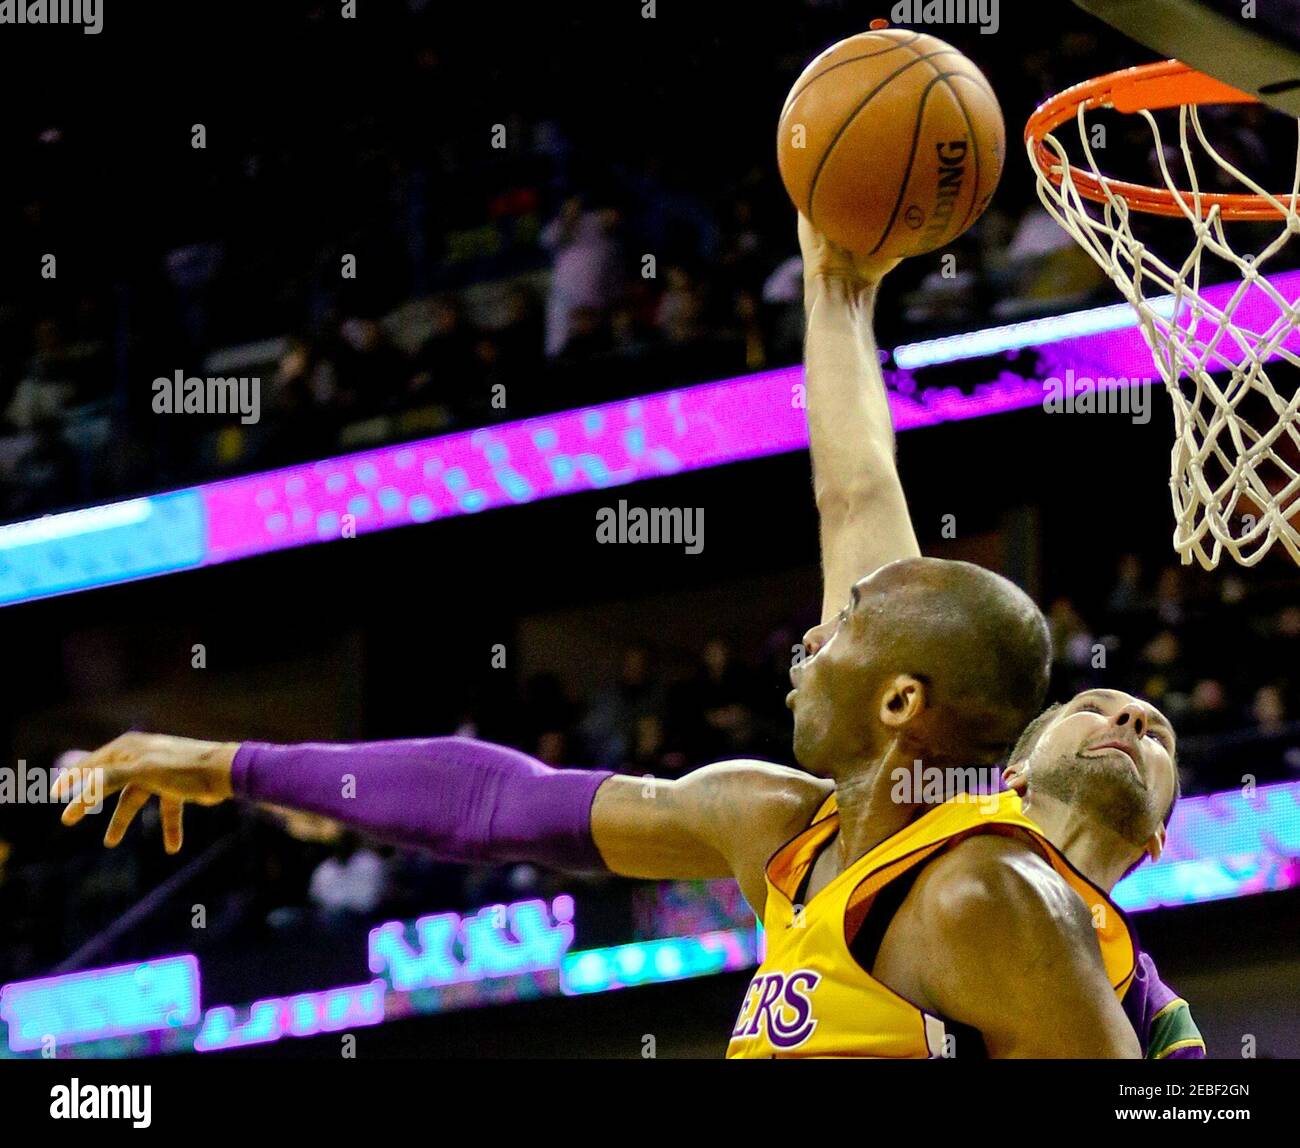 Feb 4, 2016; New Orleans, LA, USA; New Orleans Pelicans forward Ryan Anderson (33) dunks over Los Angeles Lakers forward Kobe Bryant (24) during the second half of a game at the Smoothie King Center. The Lakers defeated the Pelicans 99-96. Mandatory Credit: Derick E. Hingle-USA TODAY Sports  / Reuters  Picture Supplied by Action Images   (TAGS: Sport Basketball NBA) *** Local Caption *** 2016-02-05T054127Z 966678023 NOCID RTRMADP 3 NBA-LOS-ANGELES-LAKERS-AT-NEW-ORLEANS-PELICANS.JPG Stock Photo